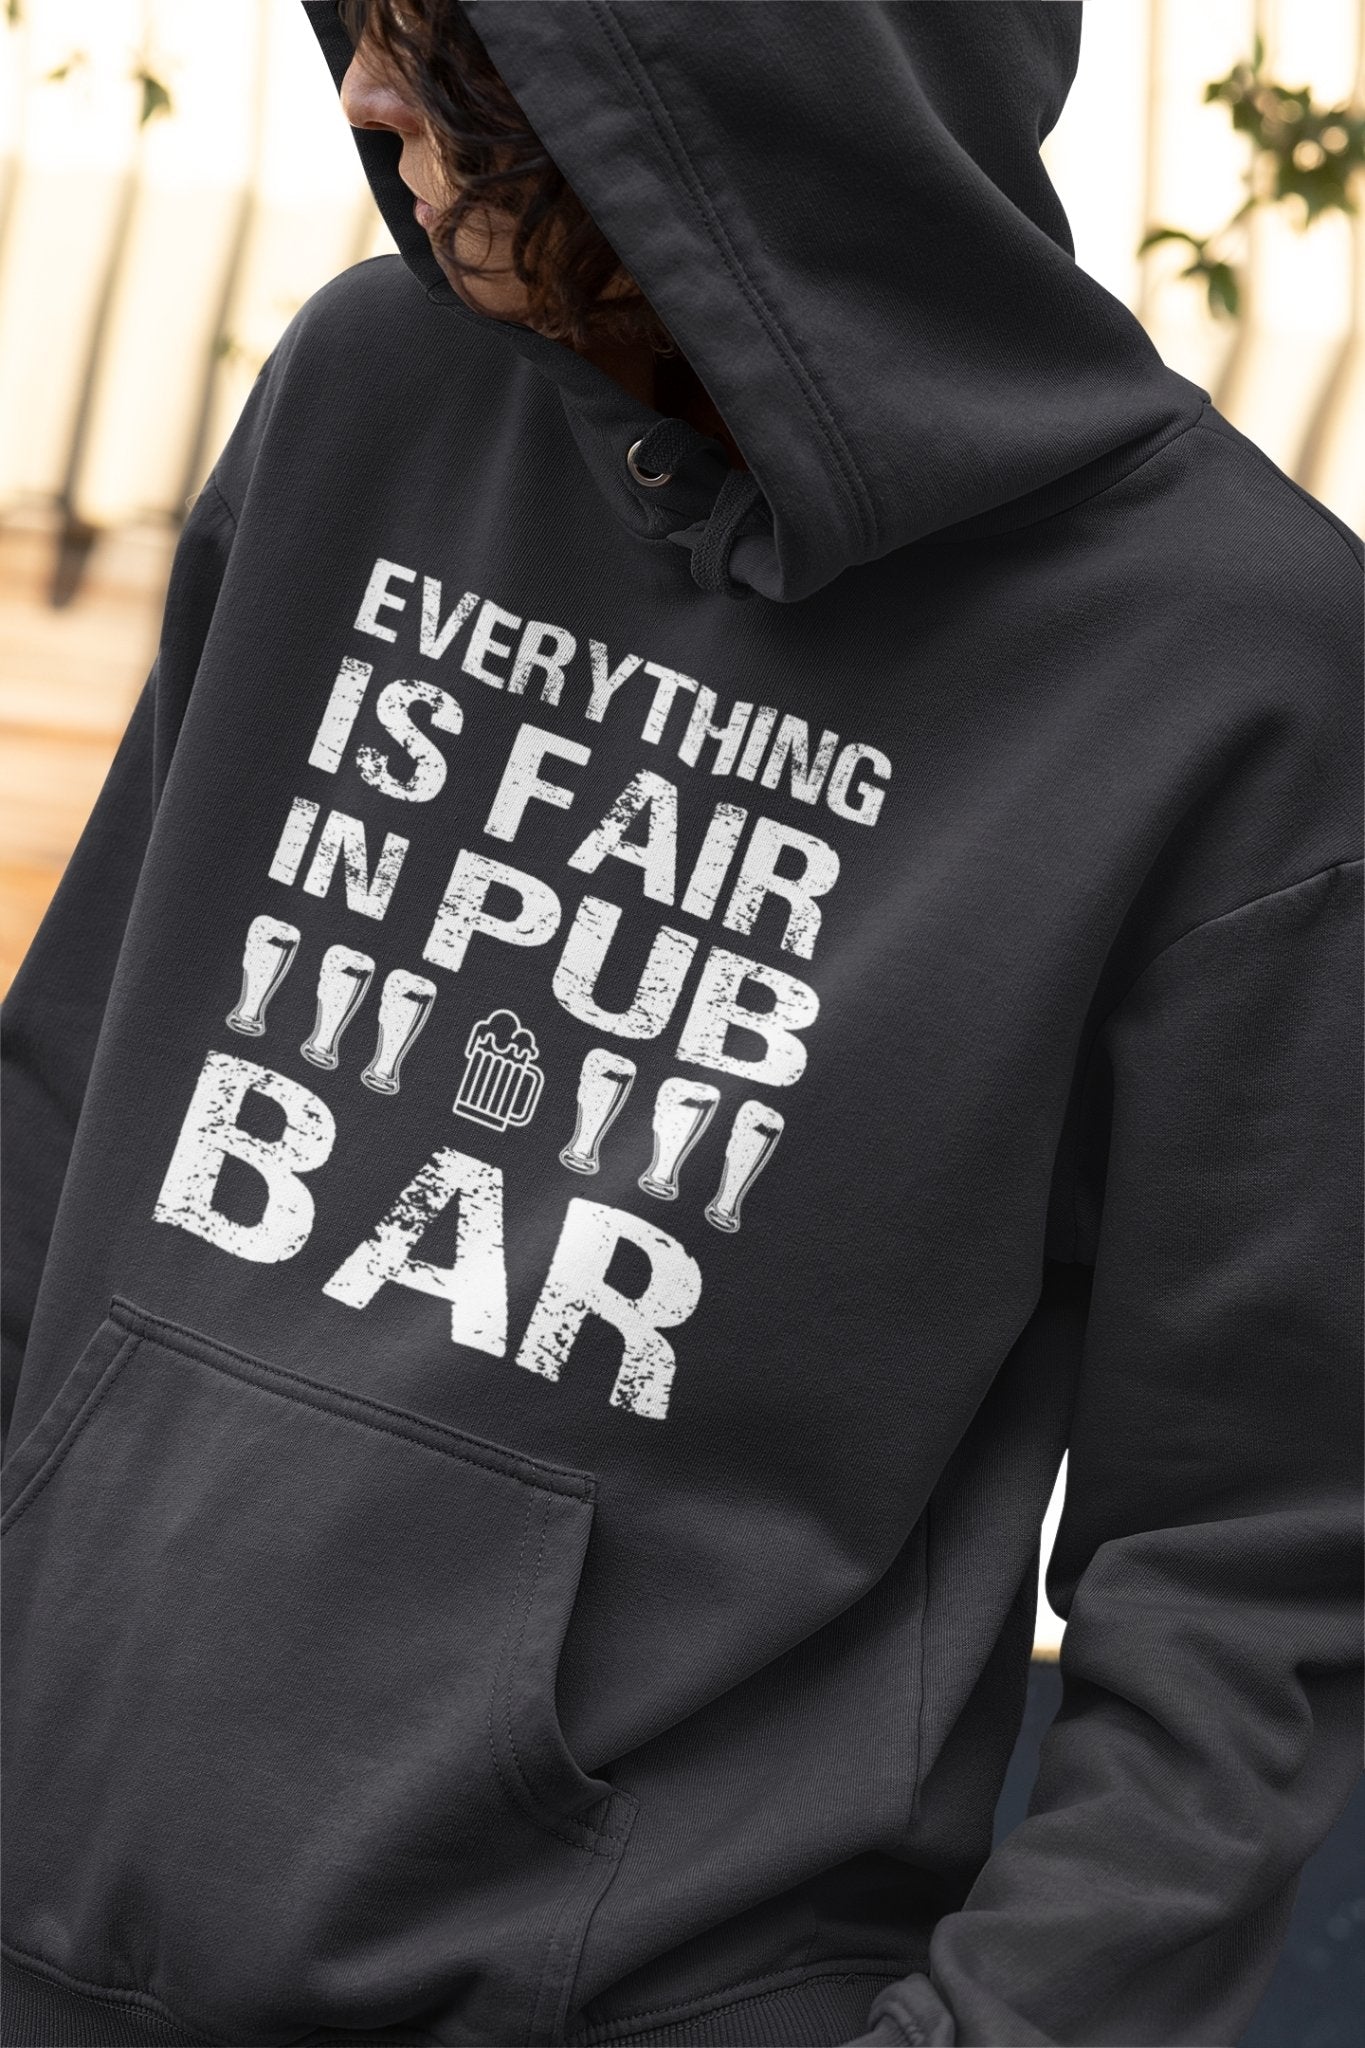 Everthing Is Fair In Pub And Bar Hoodies for Women-FunkyTradition - Funky Tees Club